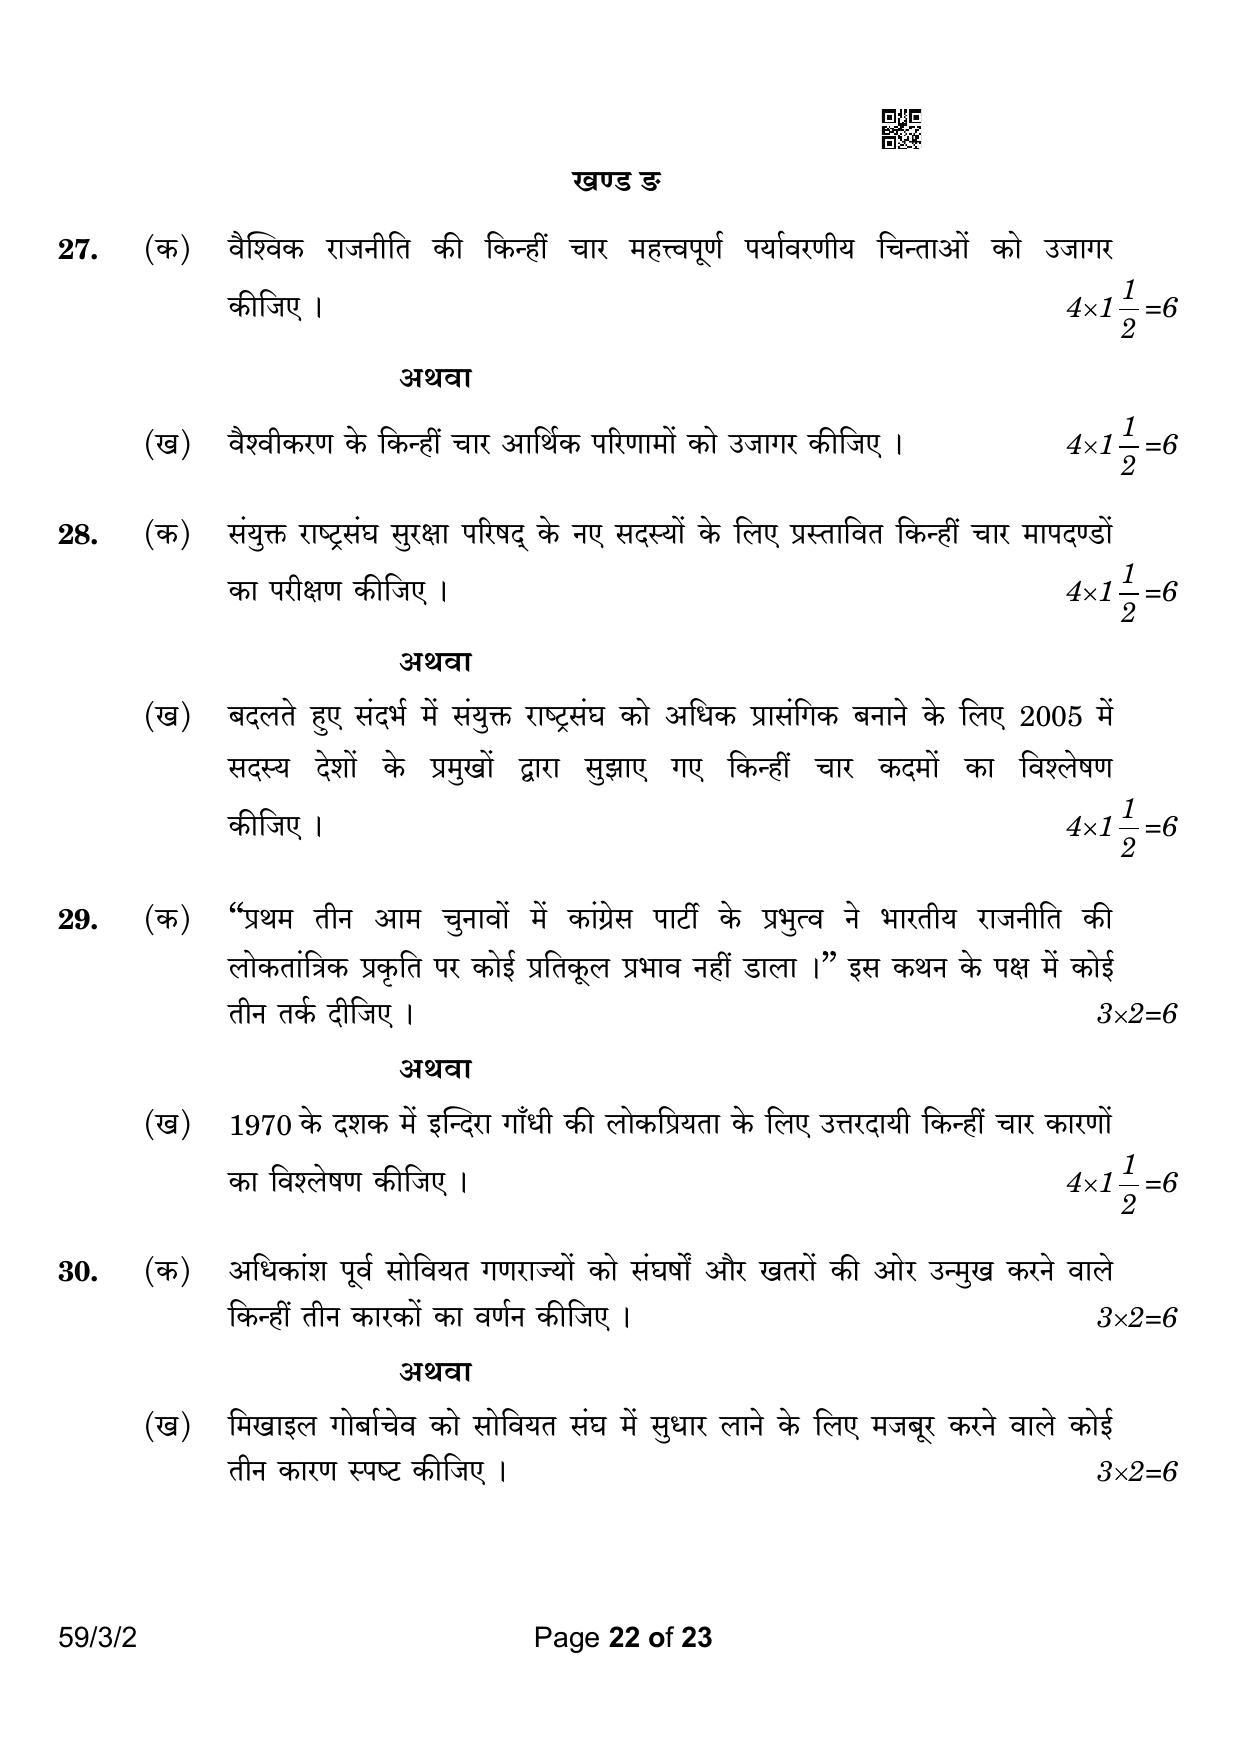 CBSE Class 12 59-3-2 Political Science 2023 Question Paper - Page 22